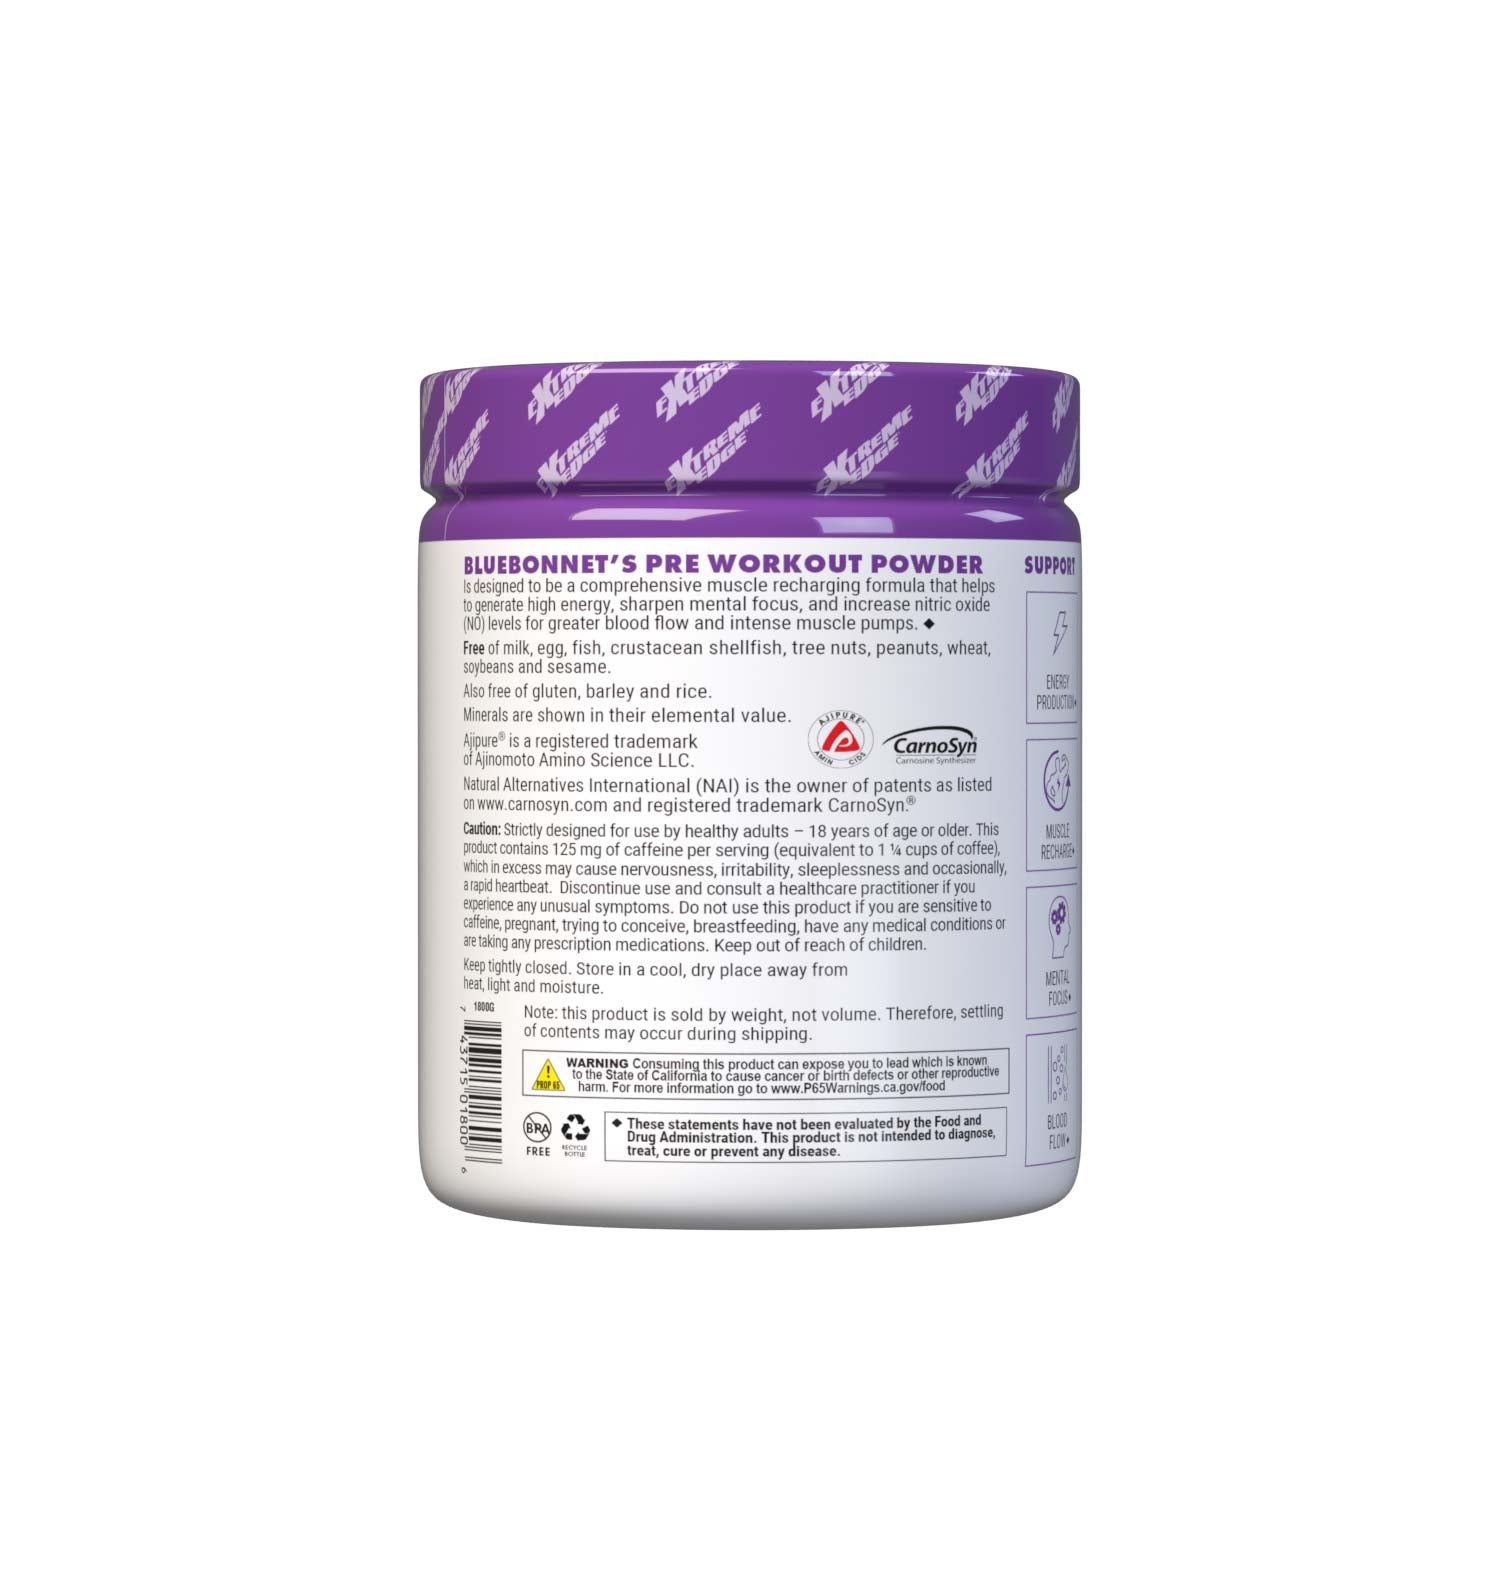 Bluebonnet's Grape Flavored Pre Workout powder is designed to be one of the most comprehensive, muscle recharging formulas ever created. This triple-turbo, super-charged formula generates high energy, sharpens mental concentration, and increases nitric oxide (NO) levels for greater blood flow and intense muscle pumps. Description panel. #size_0.66 lb